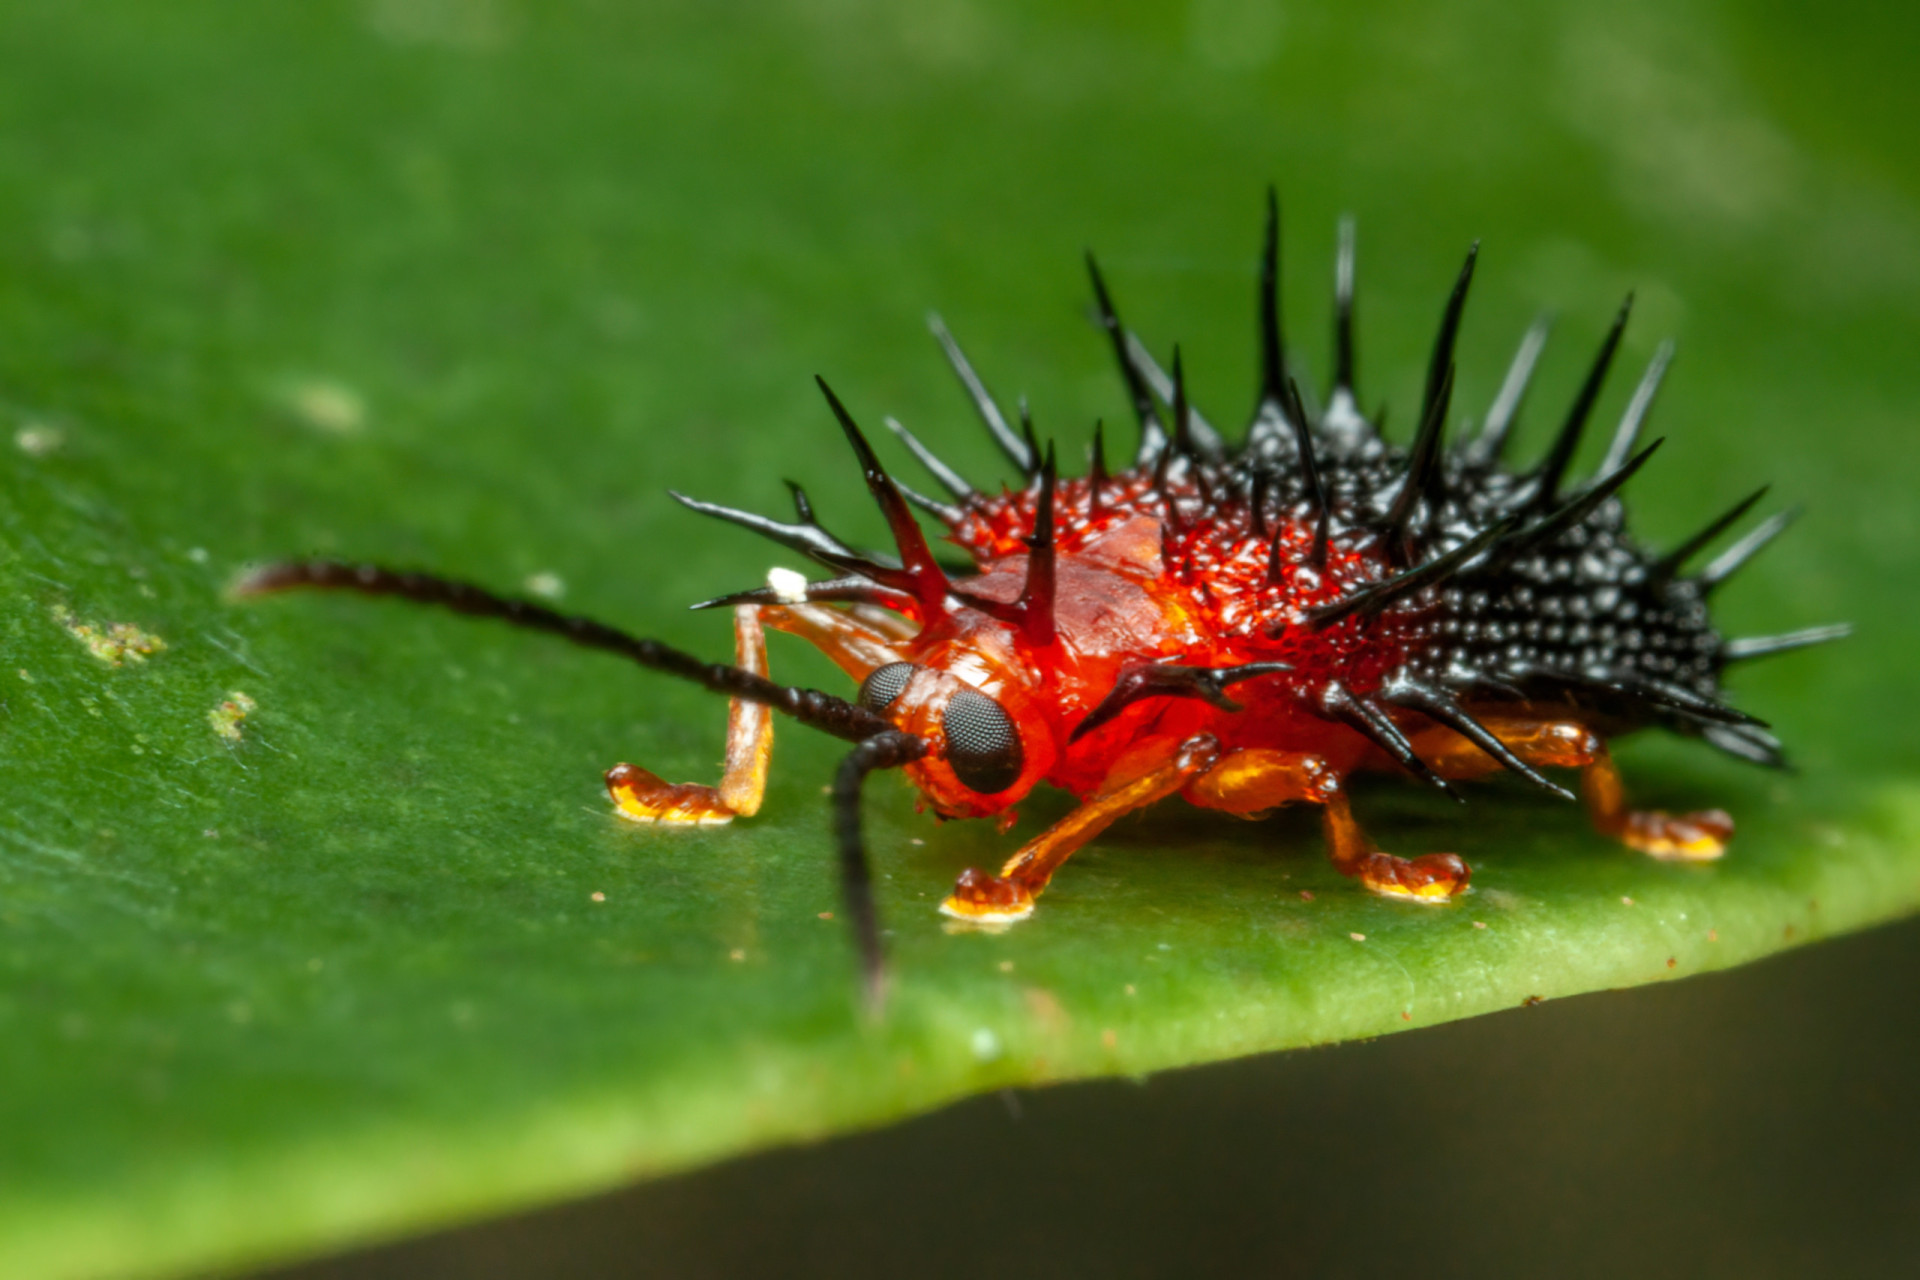 Spike-tacular! Spiny and thorny wildlife you just have to see